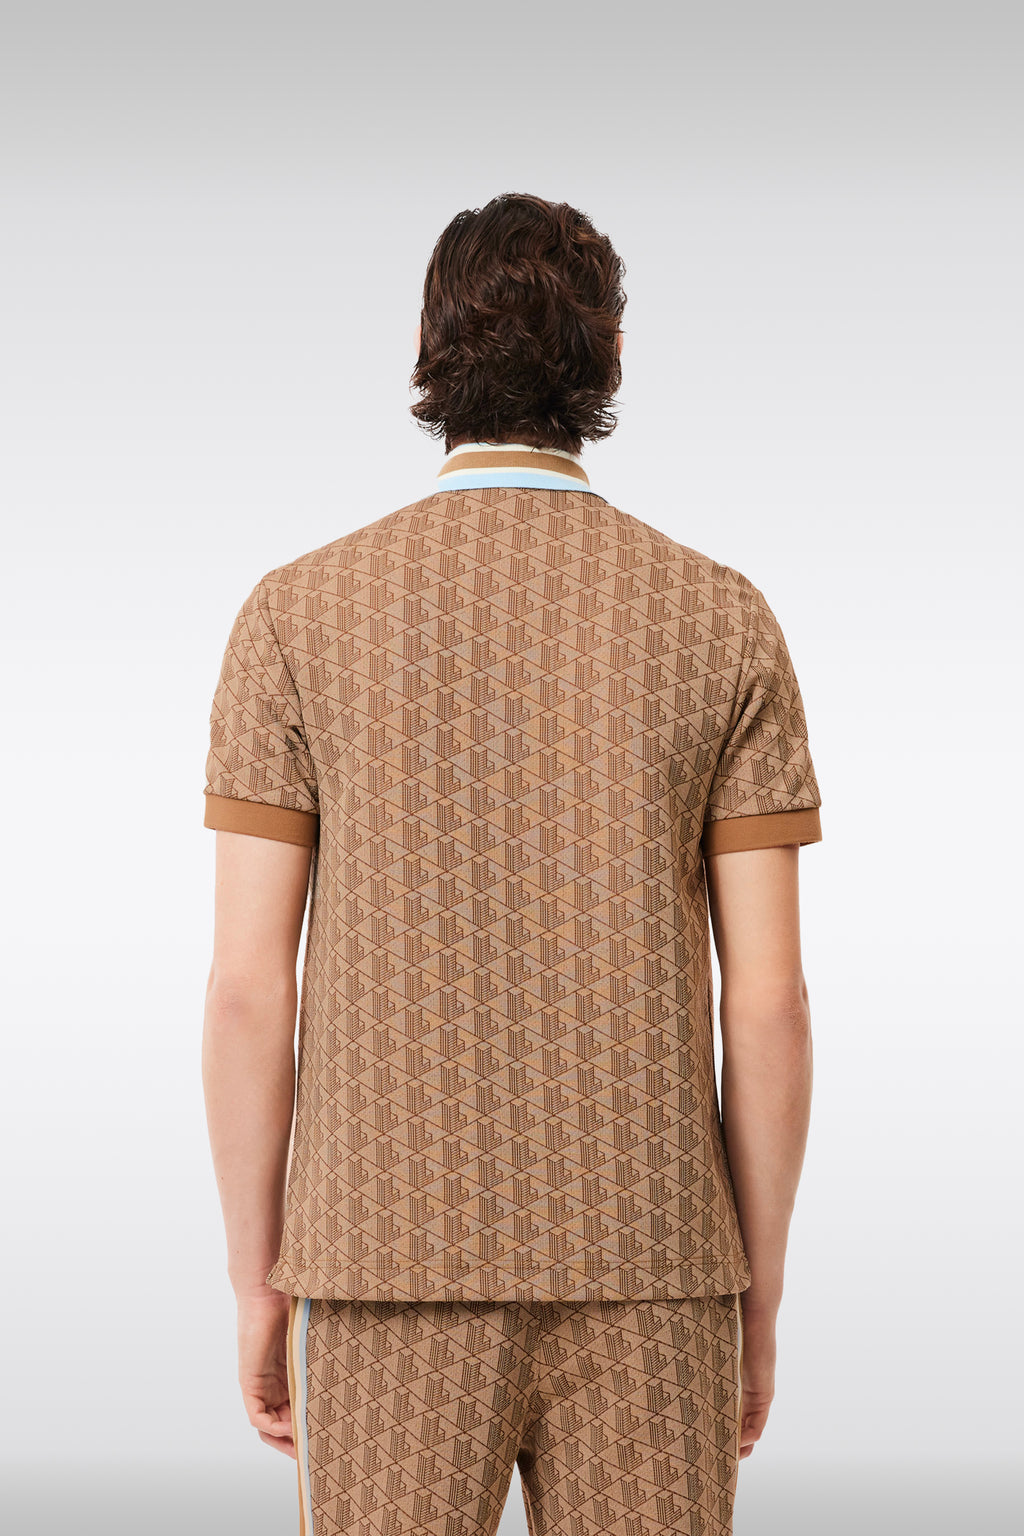 alt-image__Beige-and-brown-polo-shirt-with-jacquard-motif-